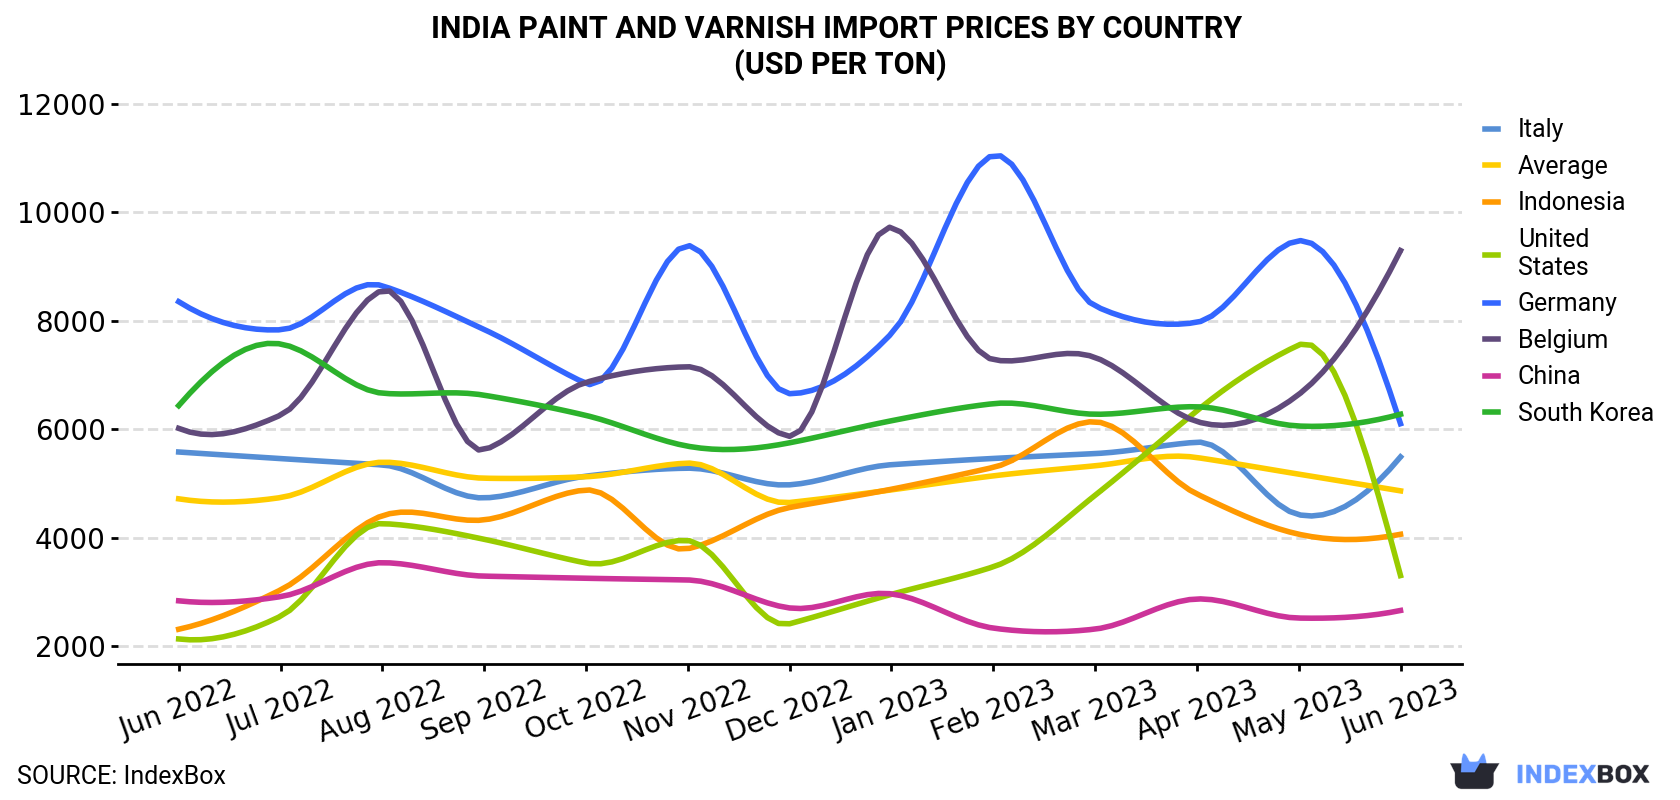 India Paint and Varnish Import Prices By Country (USD Per Ton)